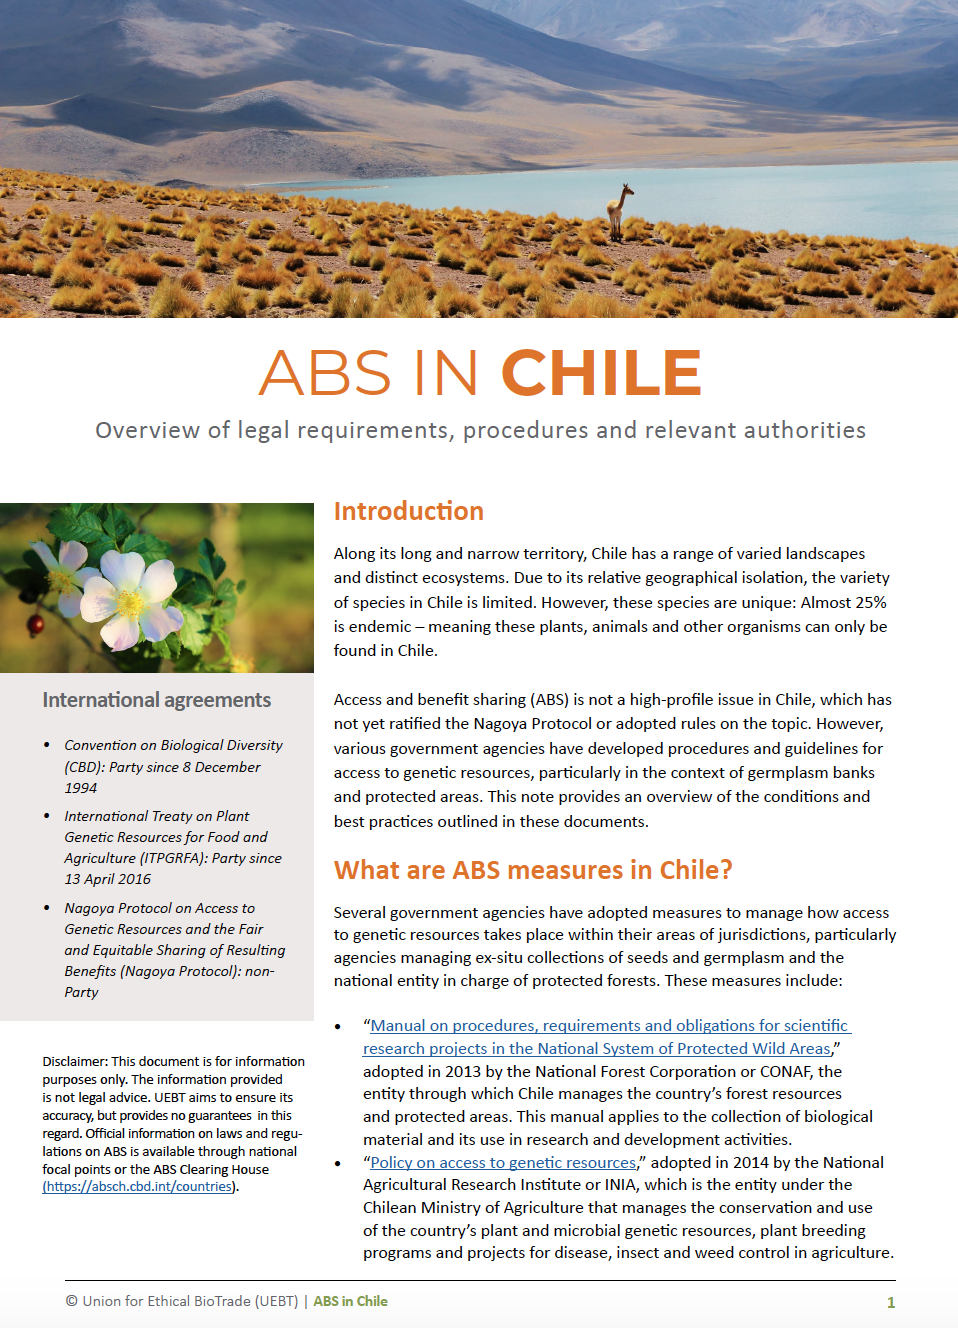 ABS in Chile — UEBT